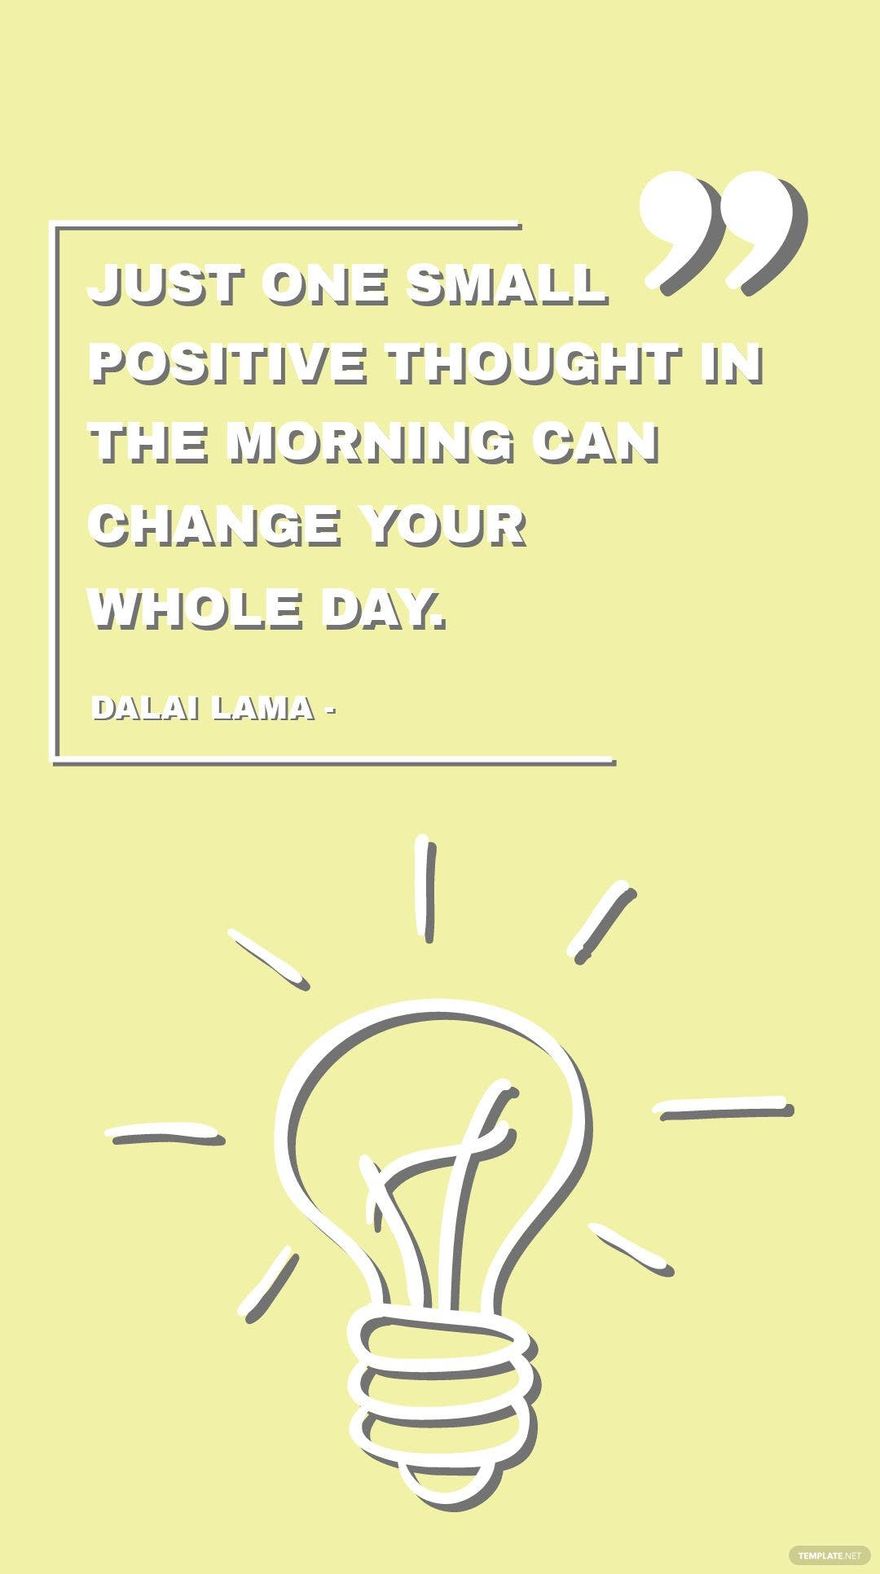 Dalai Lama - Just one small positive thought in the morning can change your whole day.